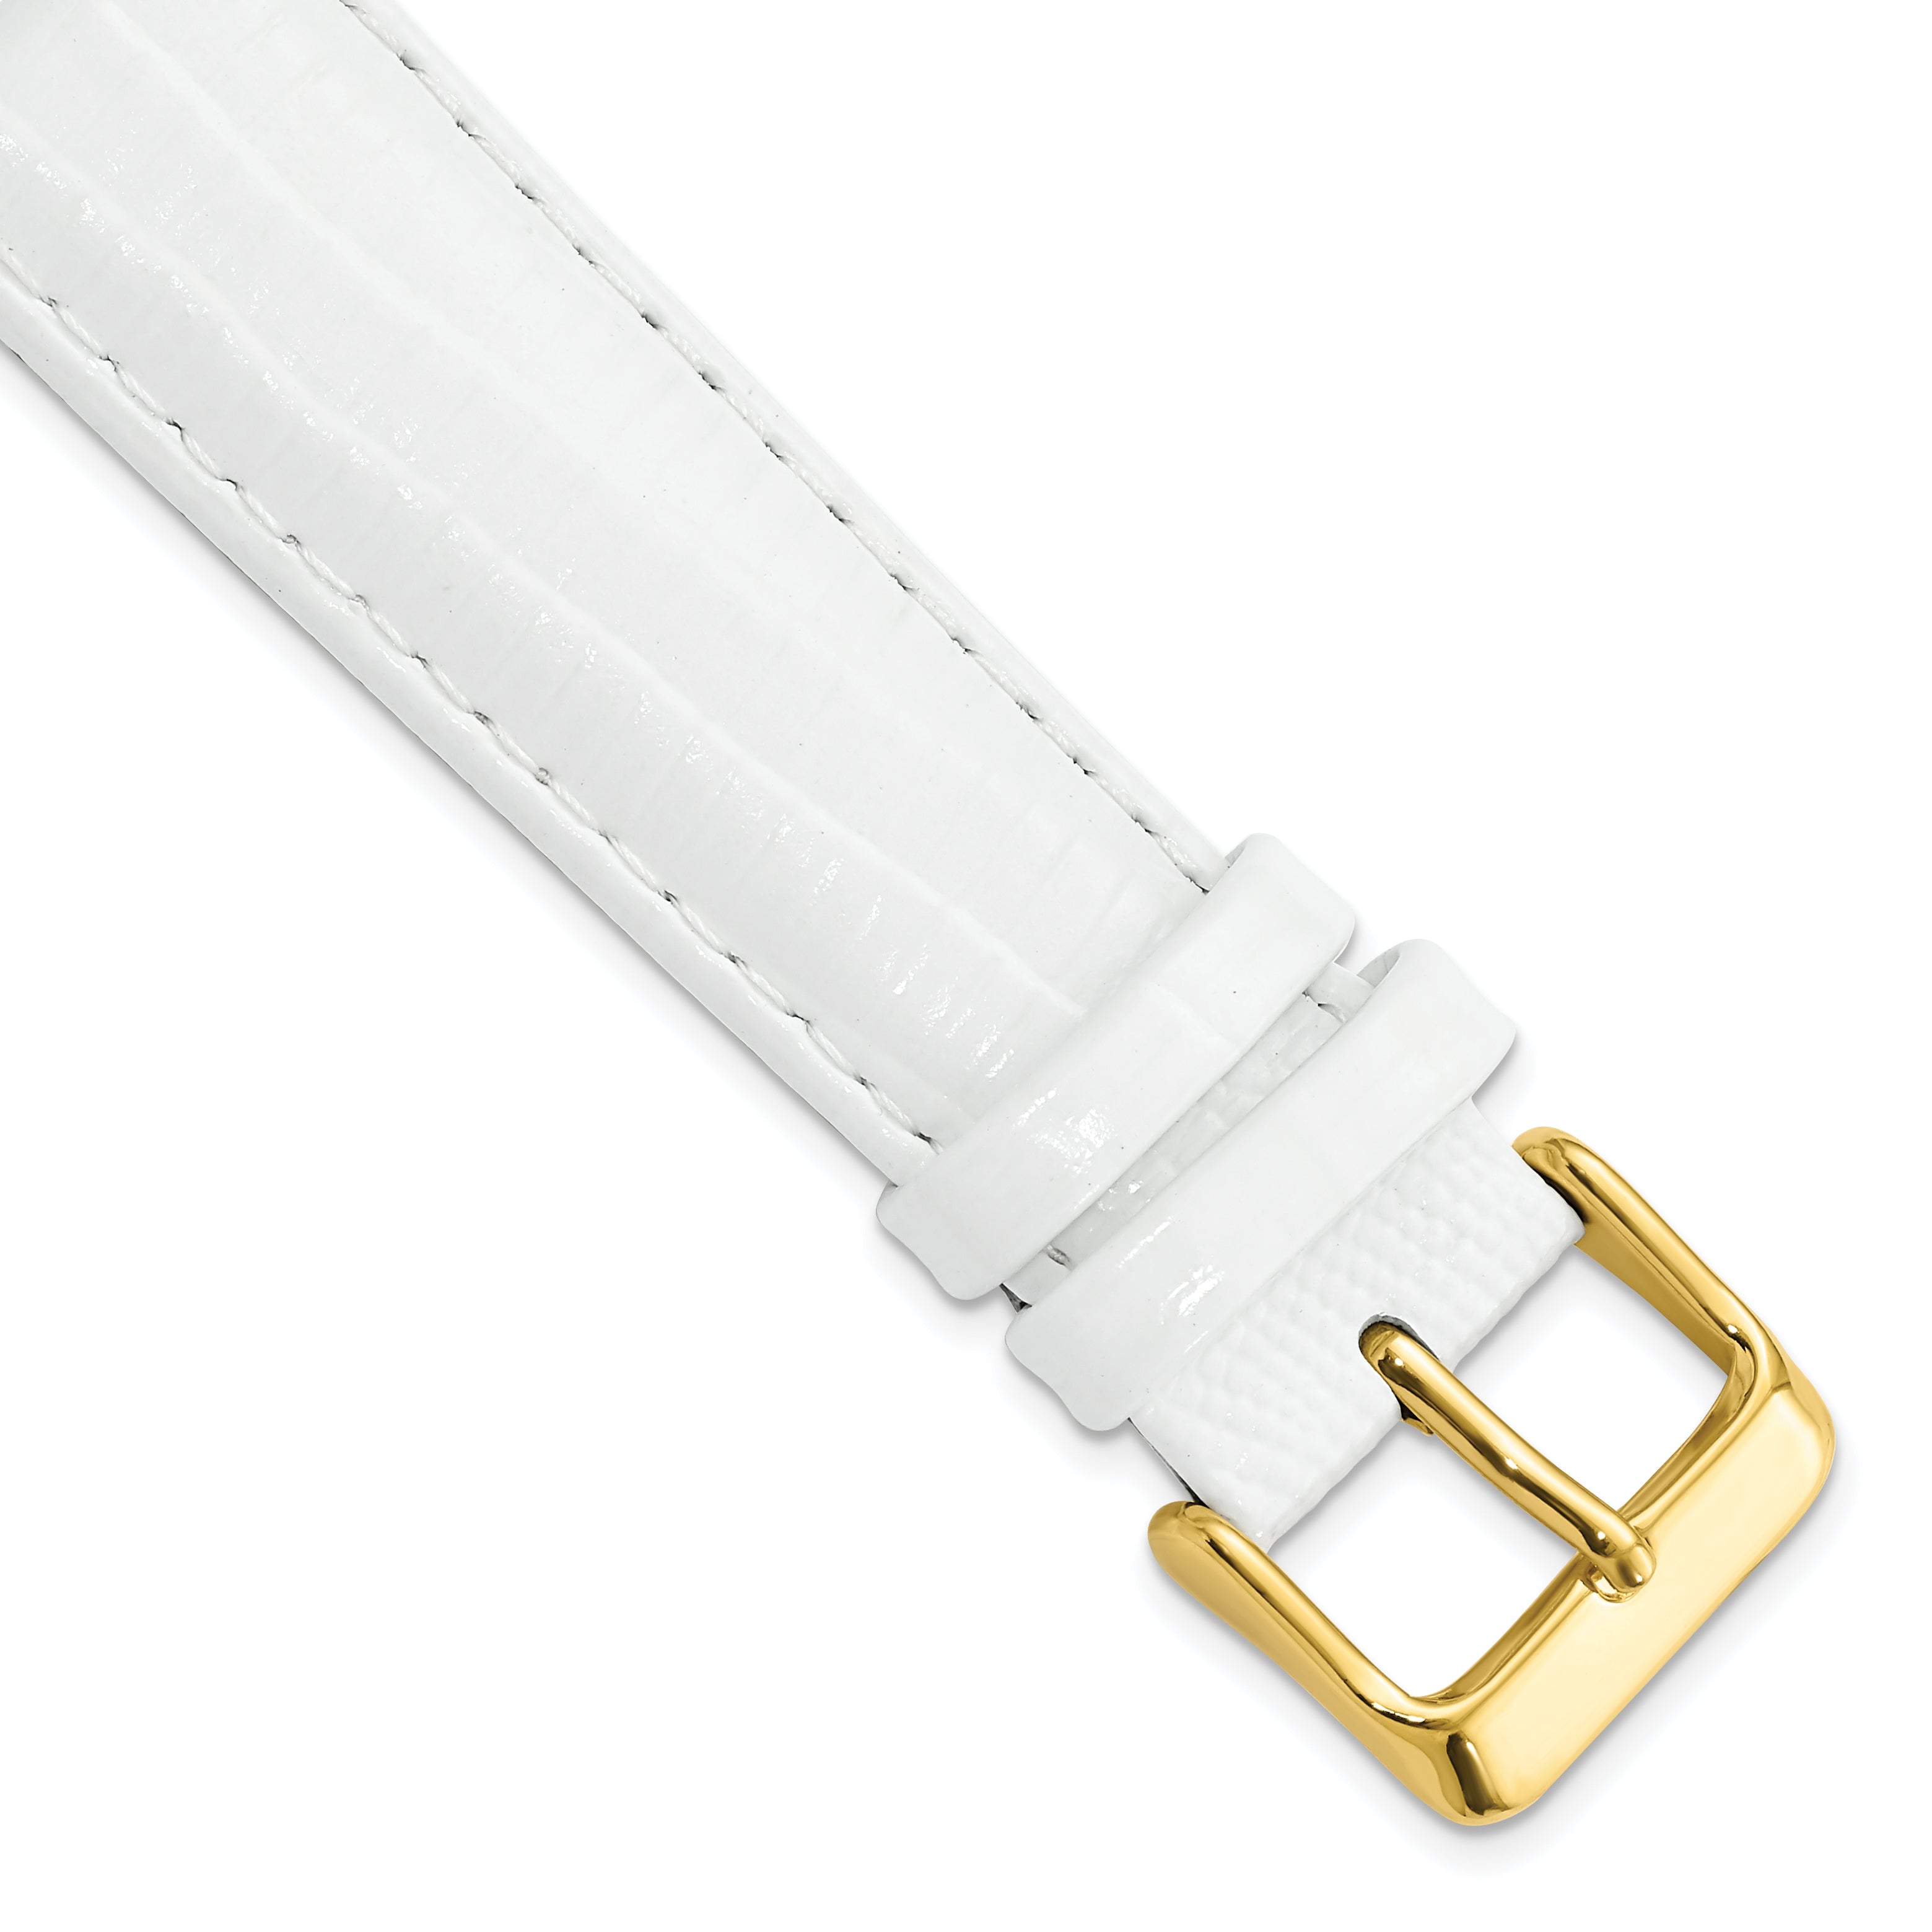 DeBeer 20mm White Teju Liz Grain Leather with Gold-tone Buckle 7.5 inch Watch Band